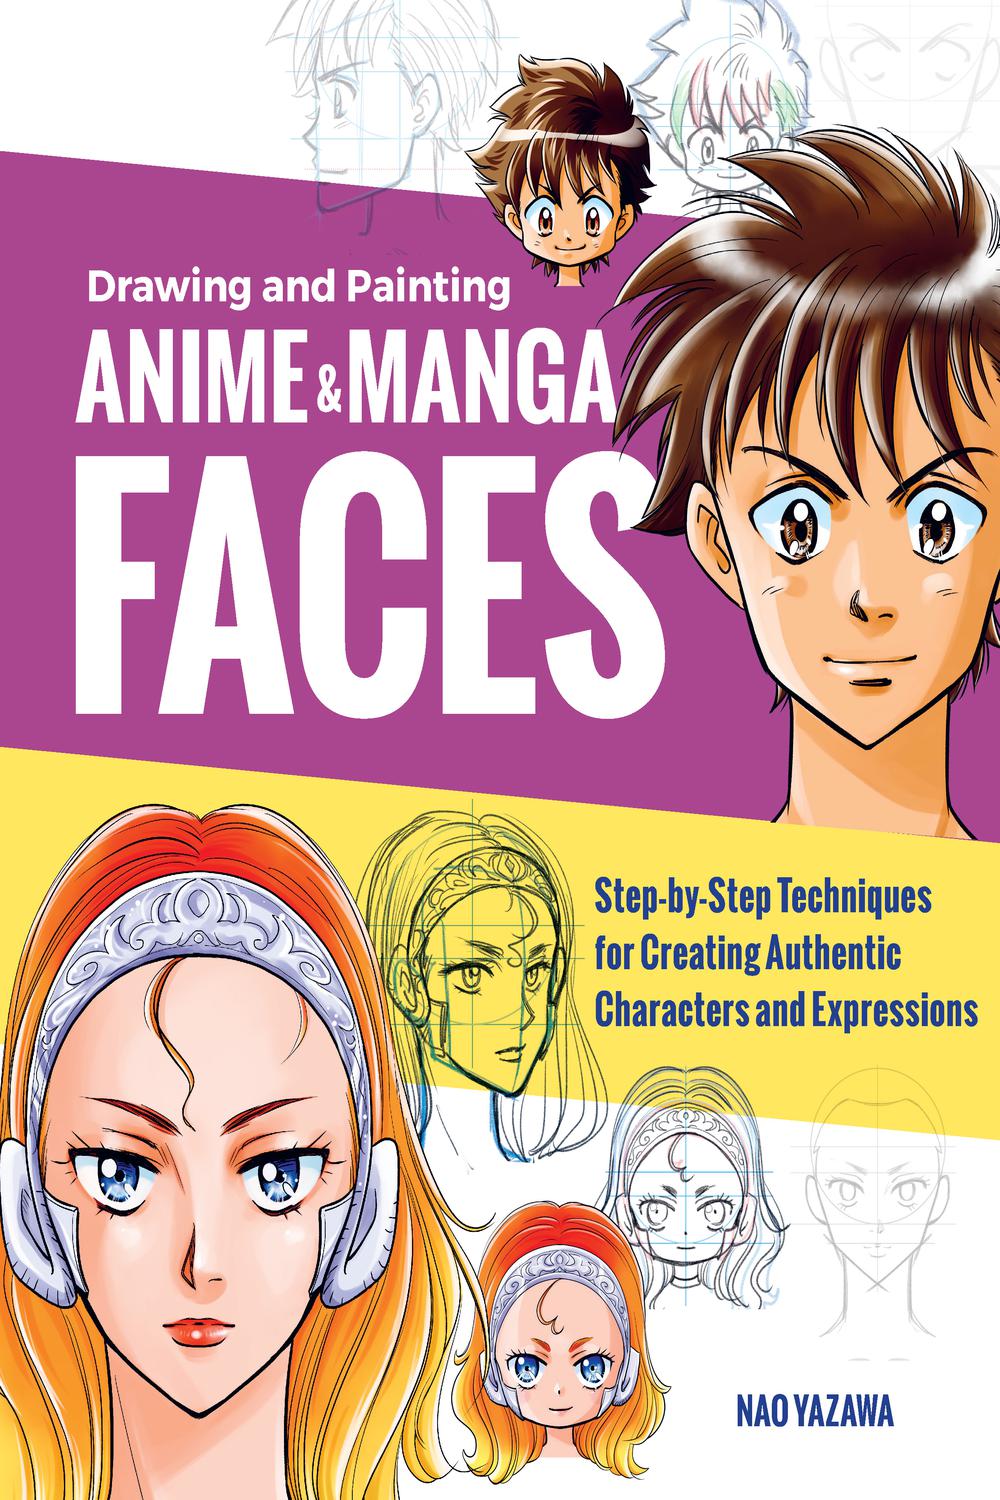 PDF] Drawing and Painting Anime and Manga Faces by Nao Yazawa eBook |  Perlego